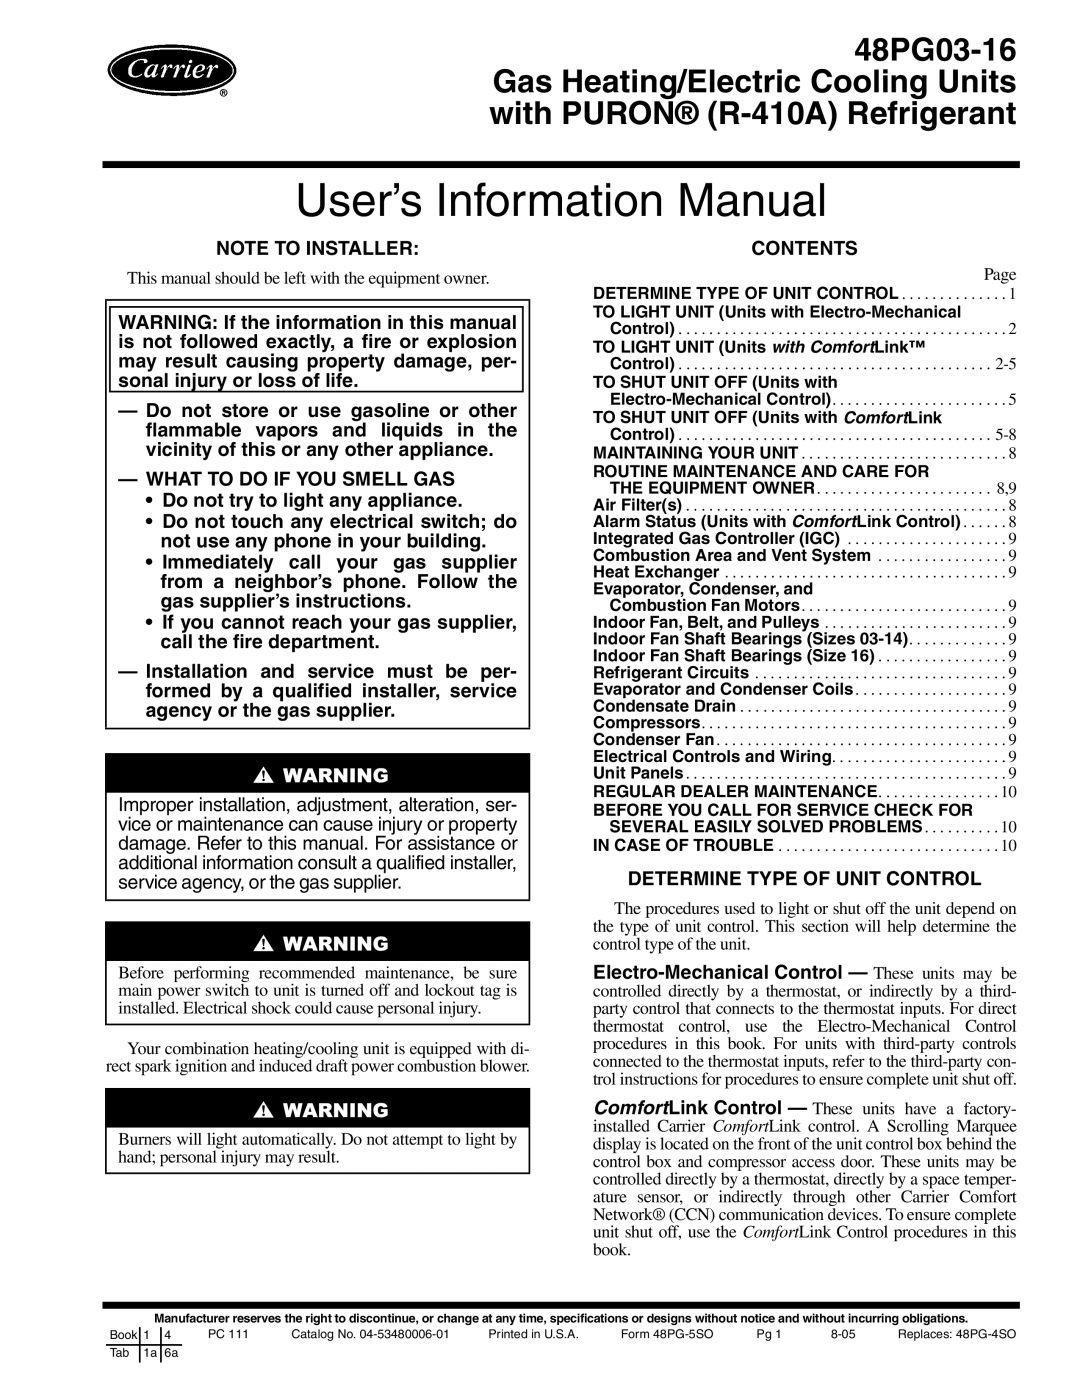 Carrier 48PG03---16 specifications User’s Information Manual 